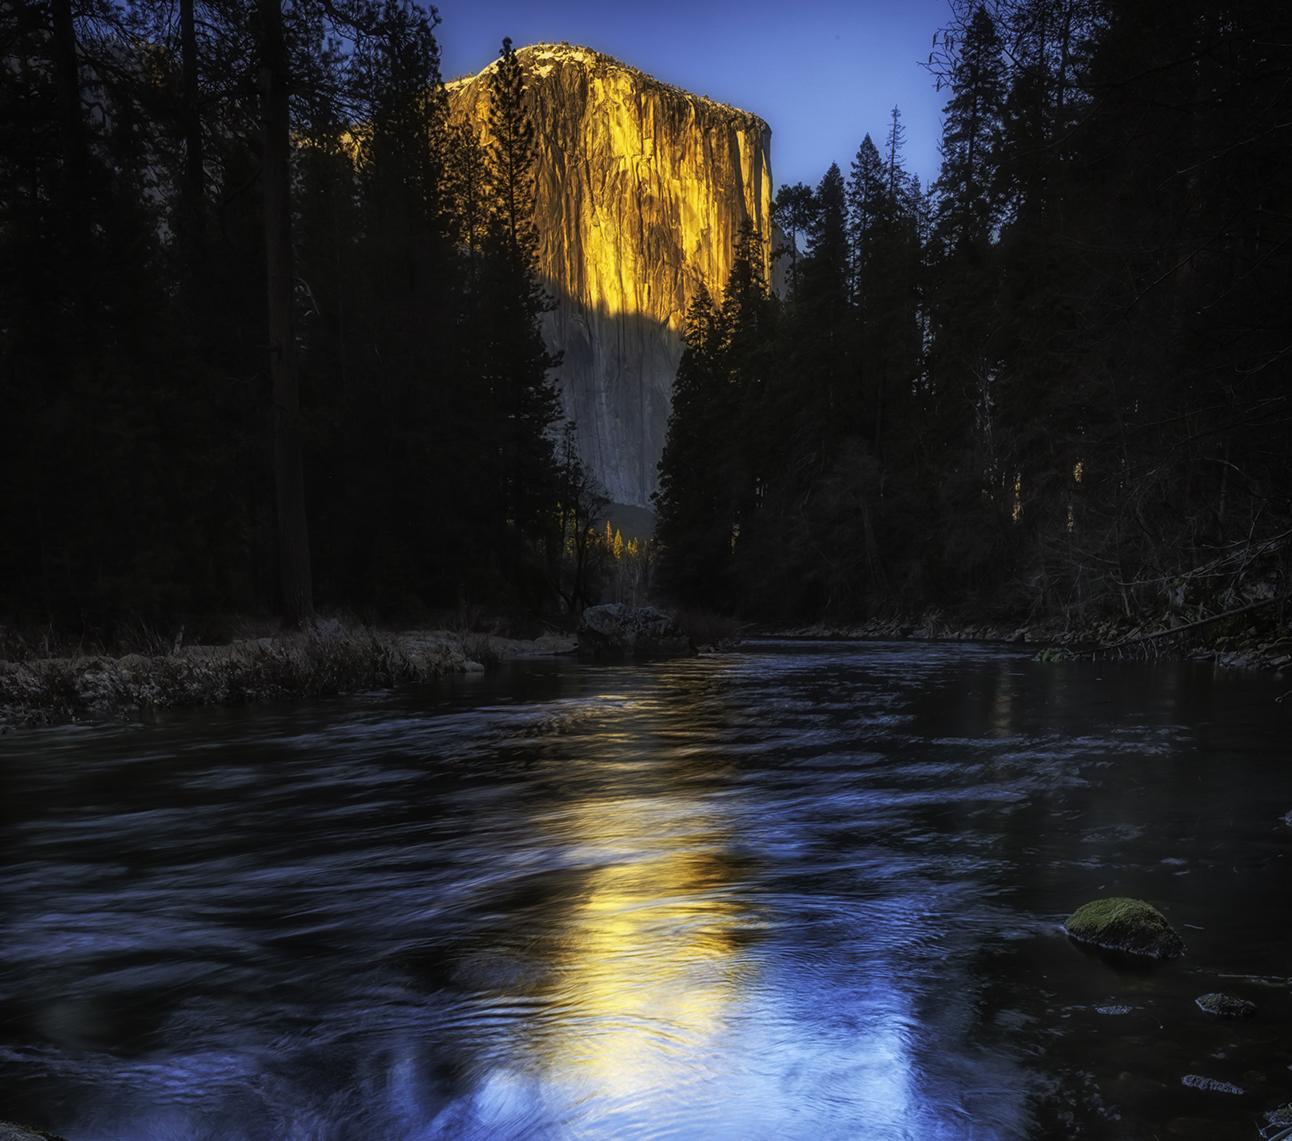 Title:    Sunset on the Merced
    Location: Yosemite National Park, California
    Edition: 2 of 5, signed by artist
    Description: It's refreshing to find yourself away from the deluge of tourists and photographers that descend on Yosemite every